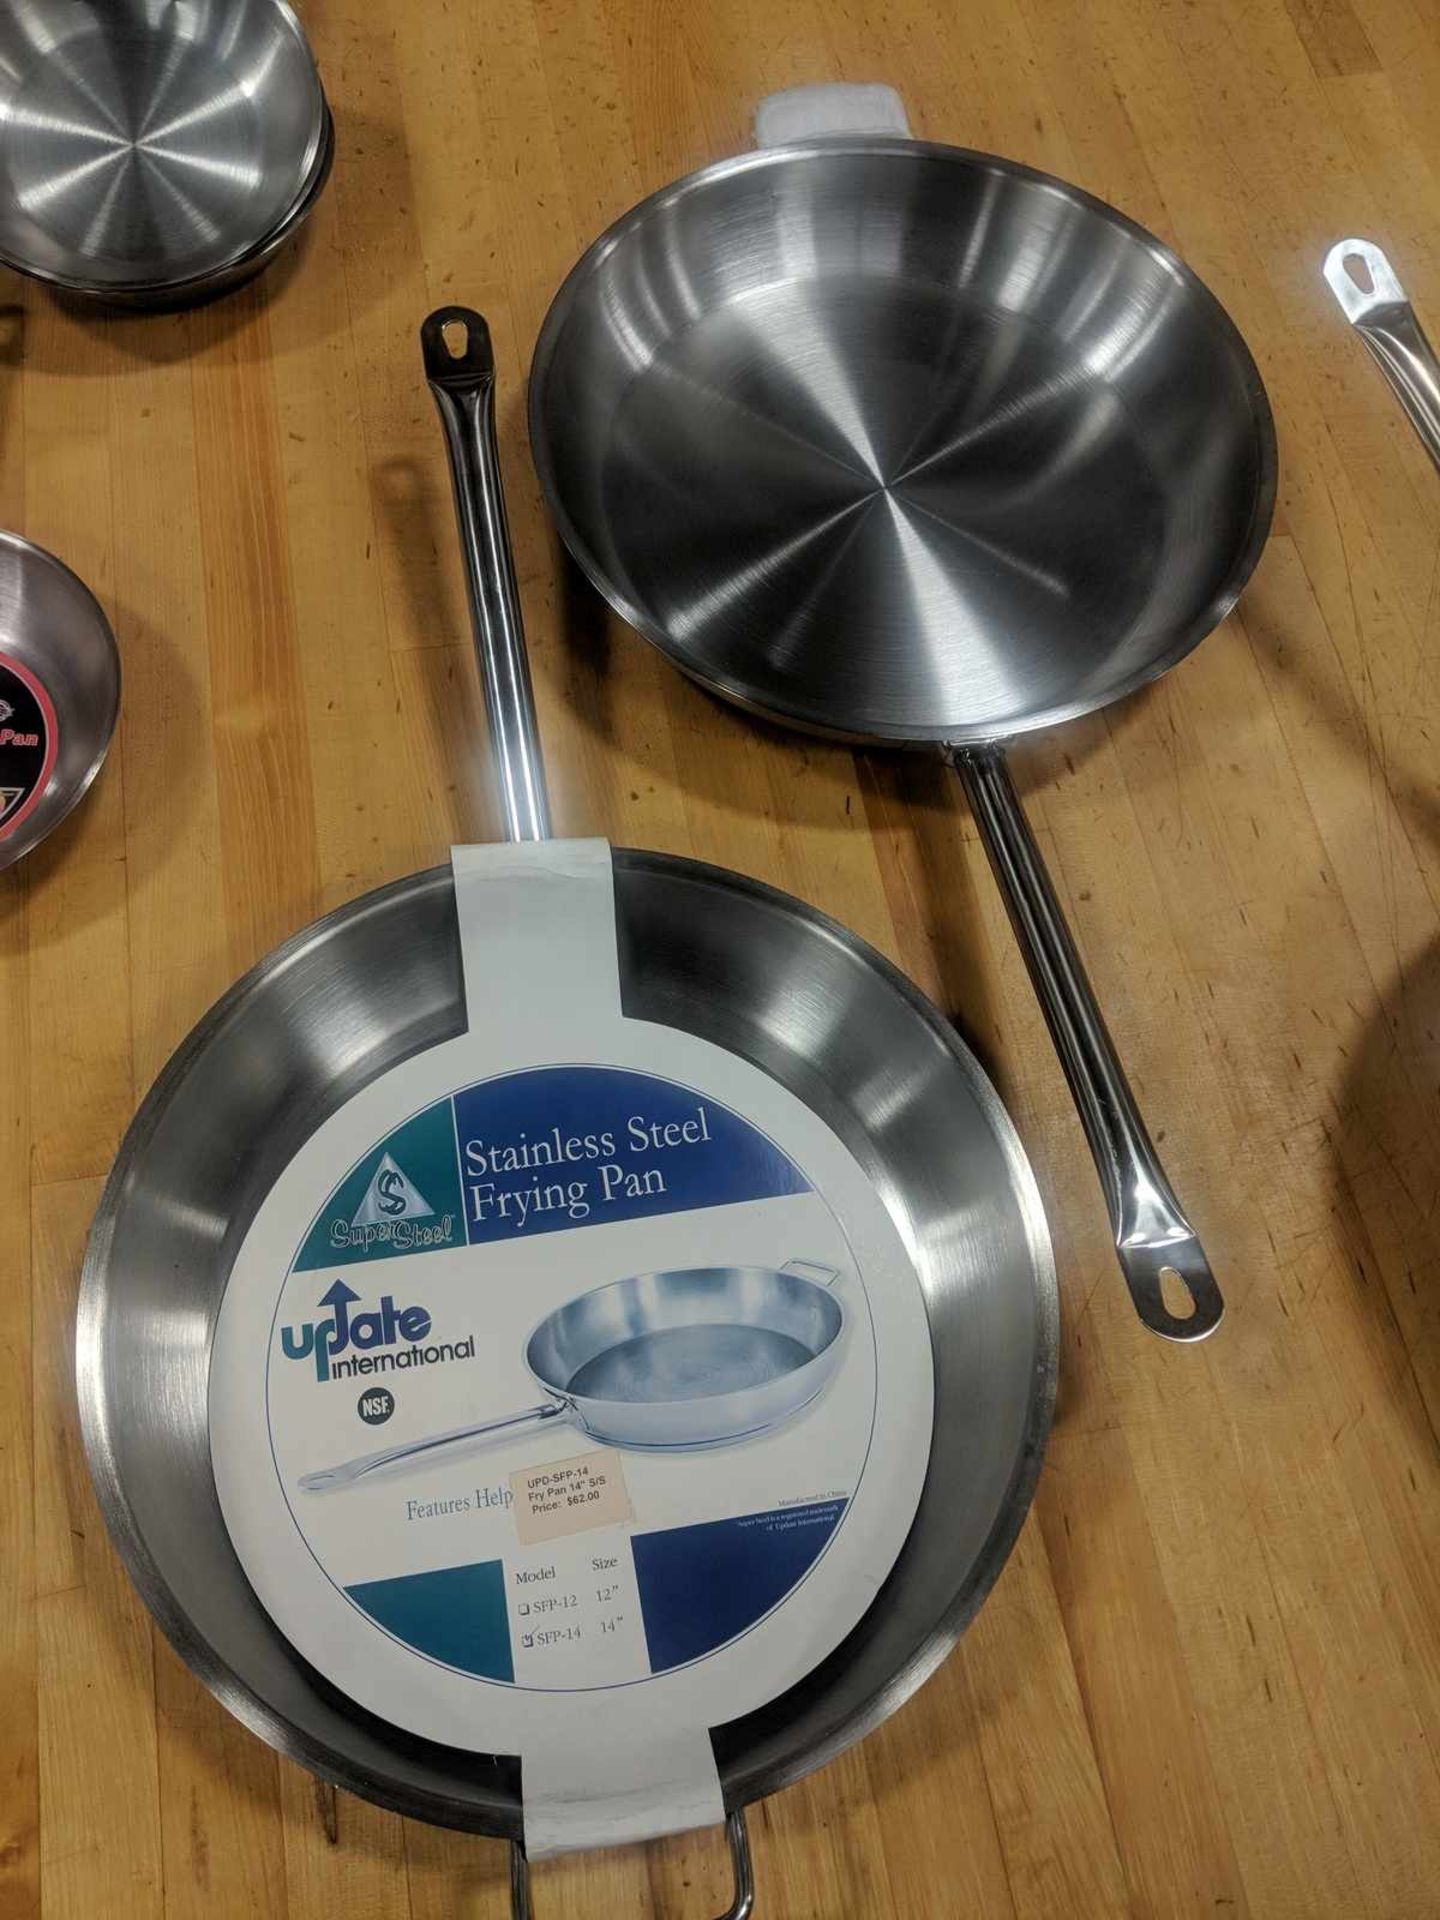 15" Stainless Steel, Induction-Ready Fry Pans, Update SFP-14 - Lot of 2